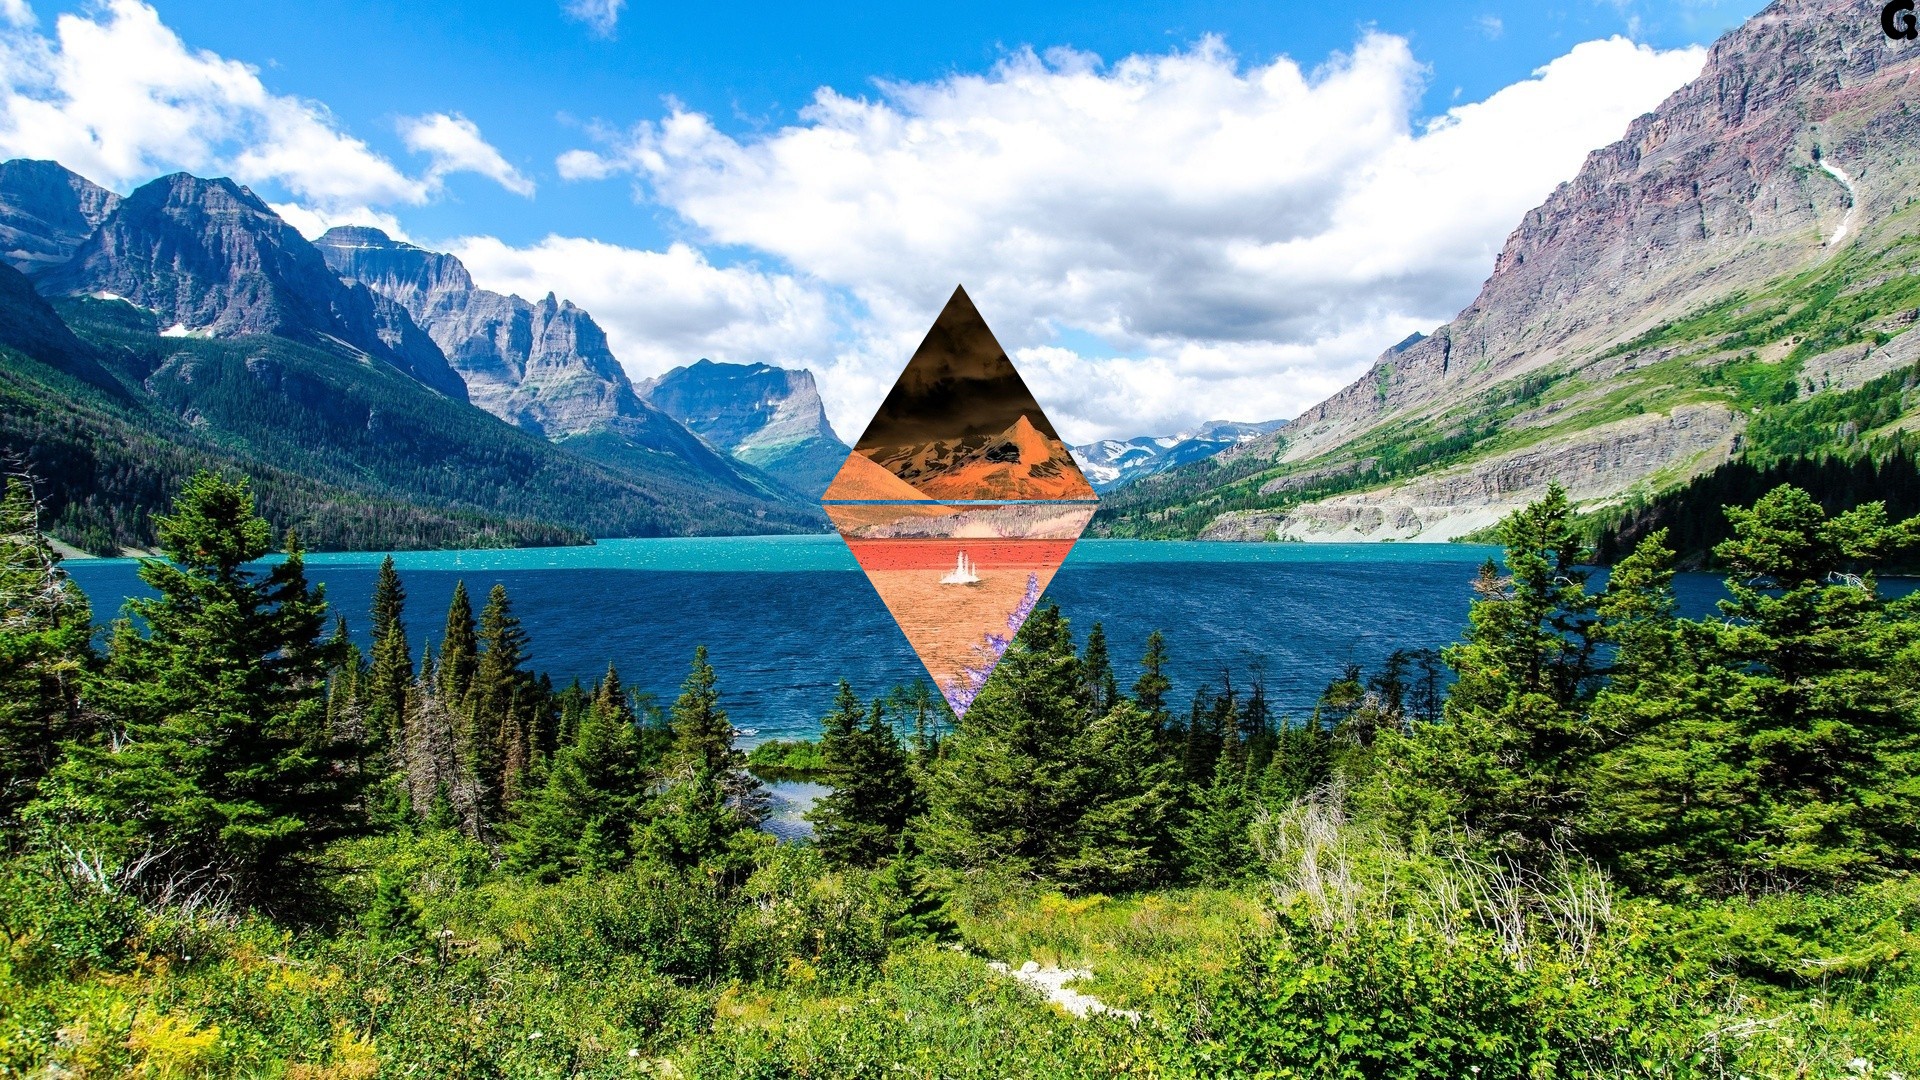 General 1920x1080 triangle landscape inversion mountains geometric figures nature photo manipulation sky clouds digital art trees water forest lake